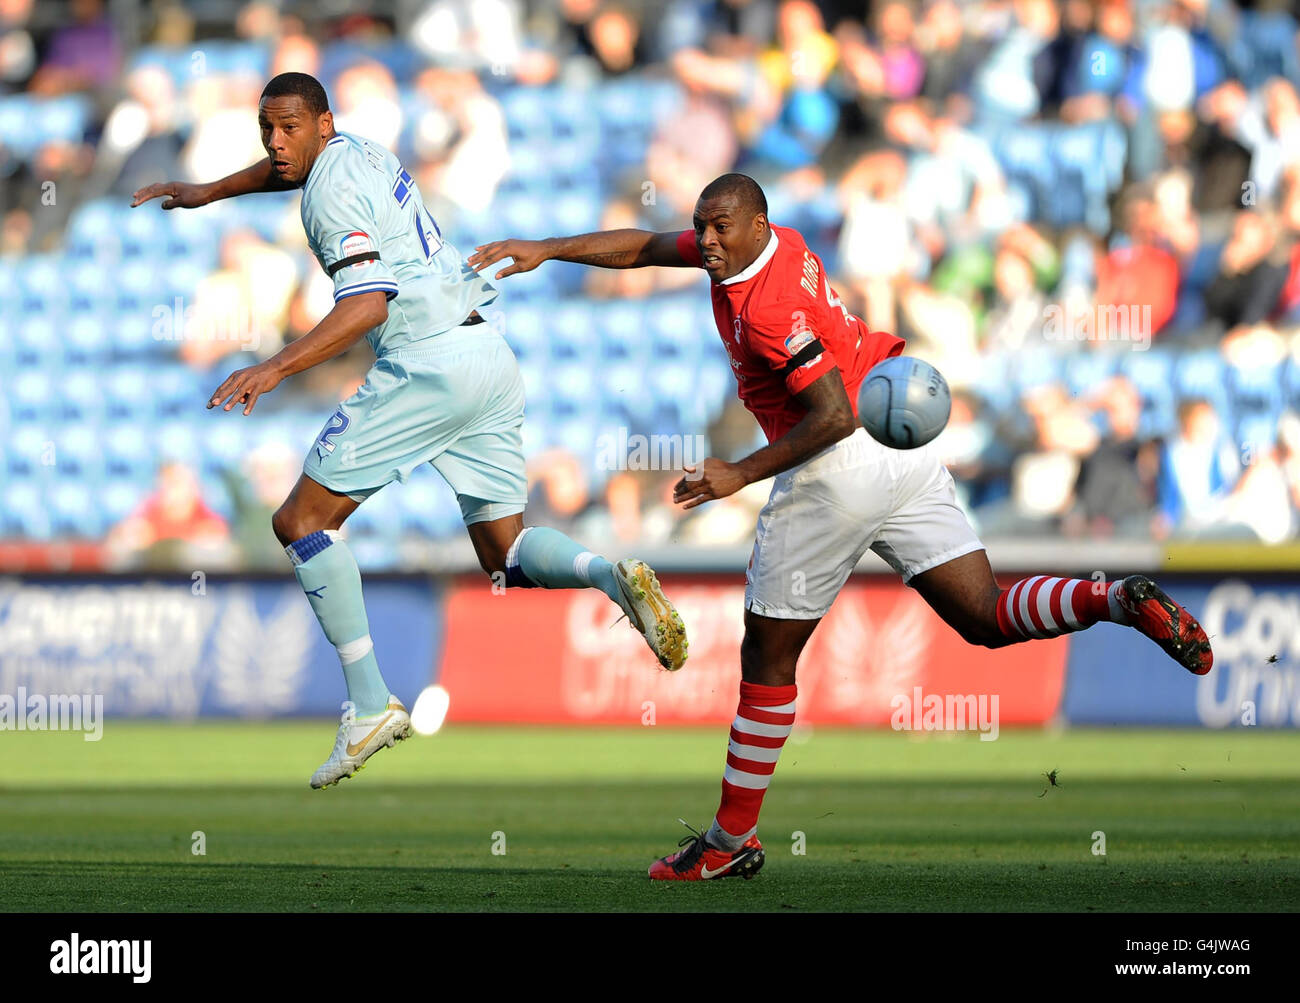 Coventry City's Clive Platt and Nottingham Forest's Wes Morgan battle for the ball during the npower Football League Championship match at the Ricoh Arena, Coventry. Stock Photo